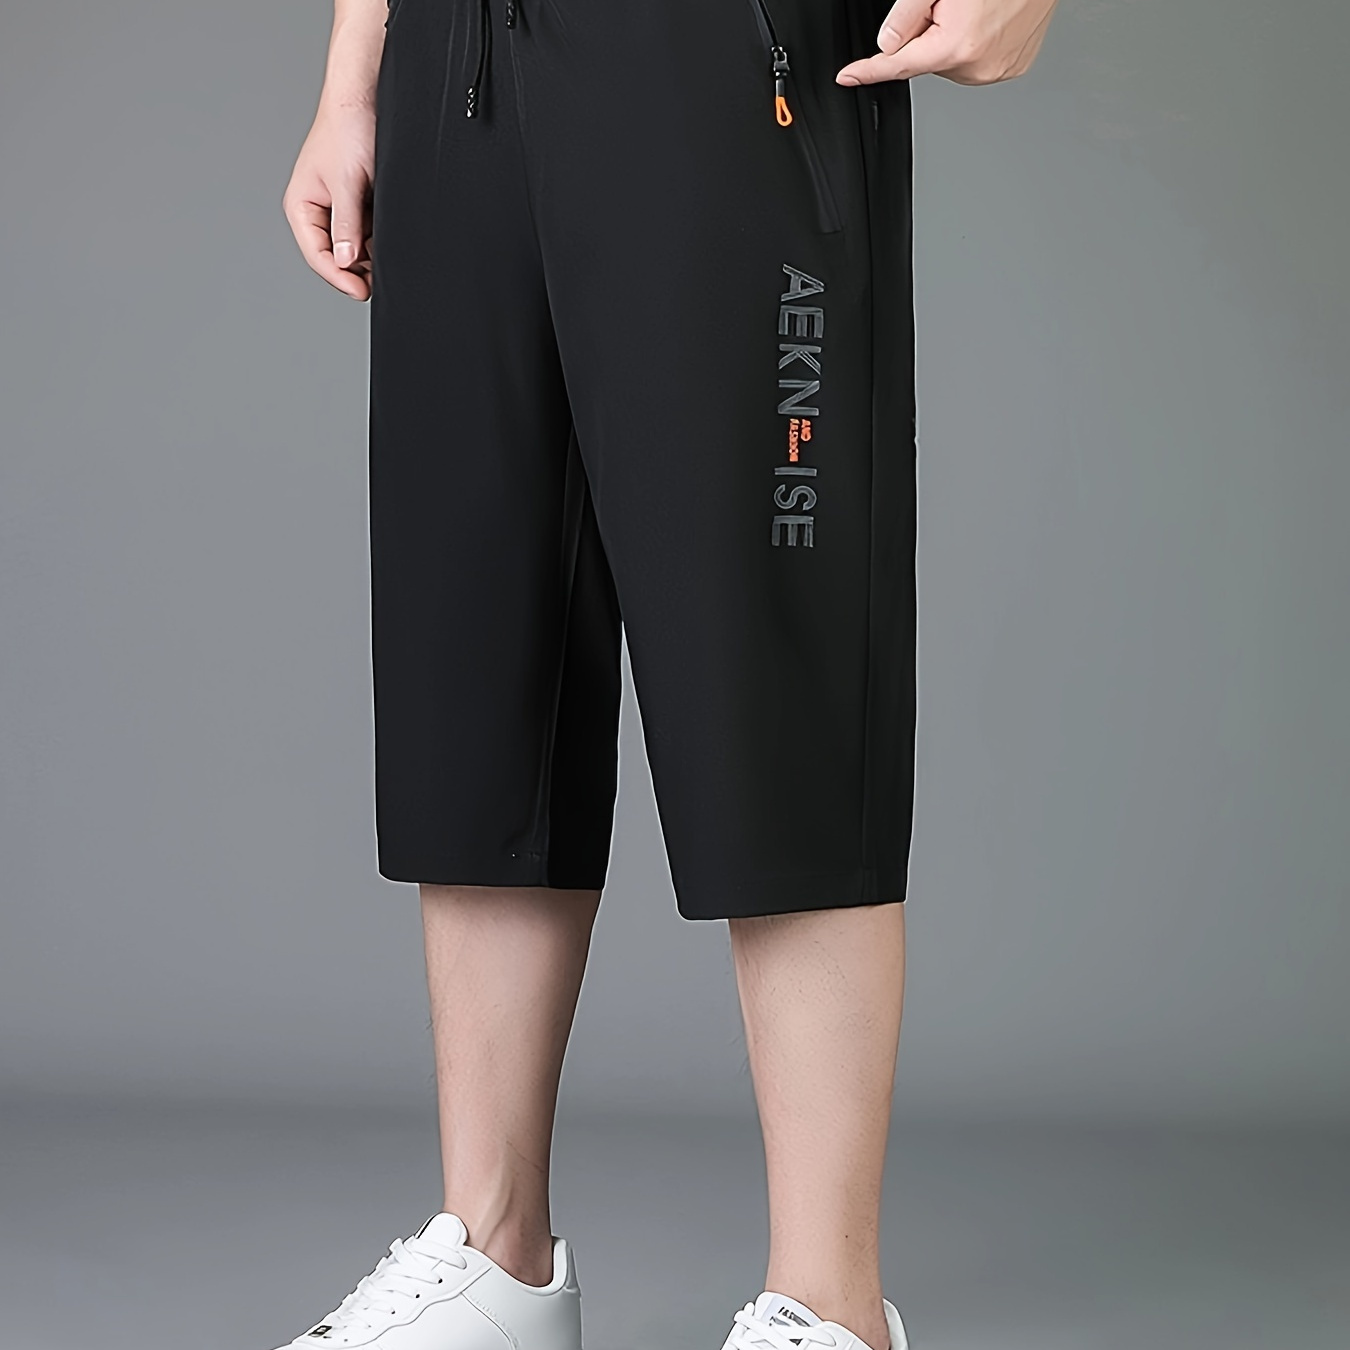 

Letter Print Men's Quick Dry And Lightweight Capri Pants With Zippered Pockets, Versatile Drawstring Leisure Shorts For Summer Daily And Sports Wear